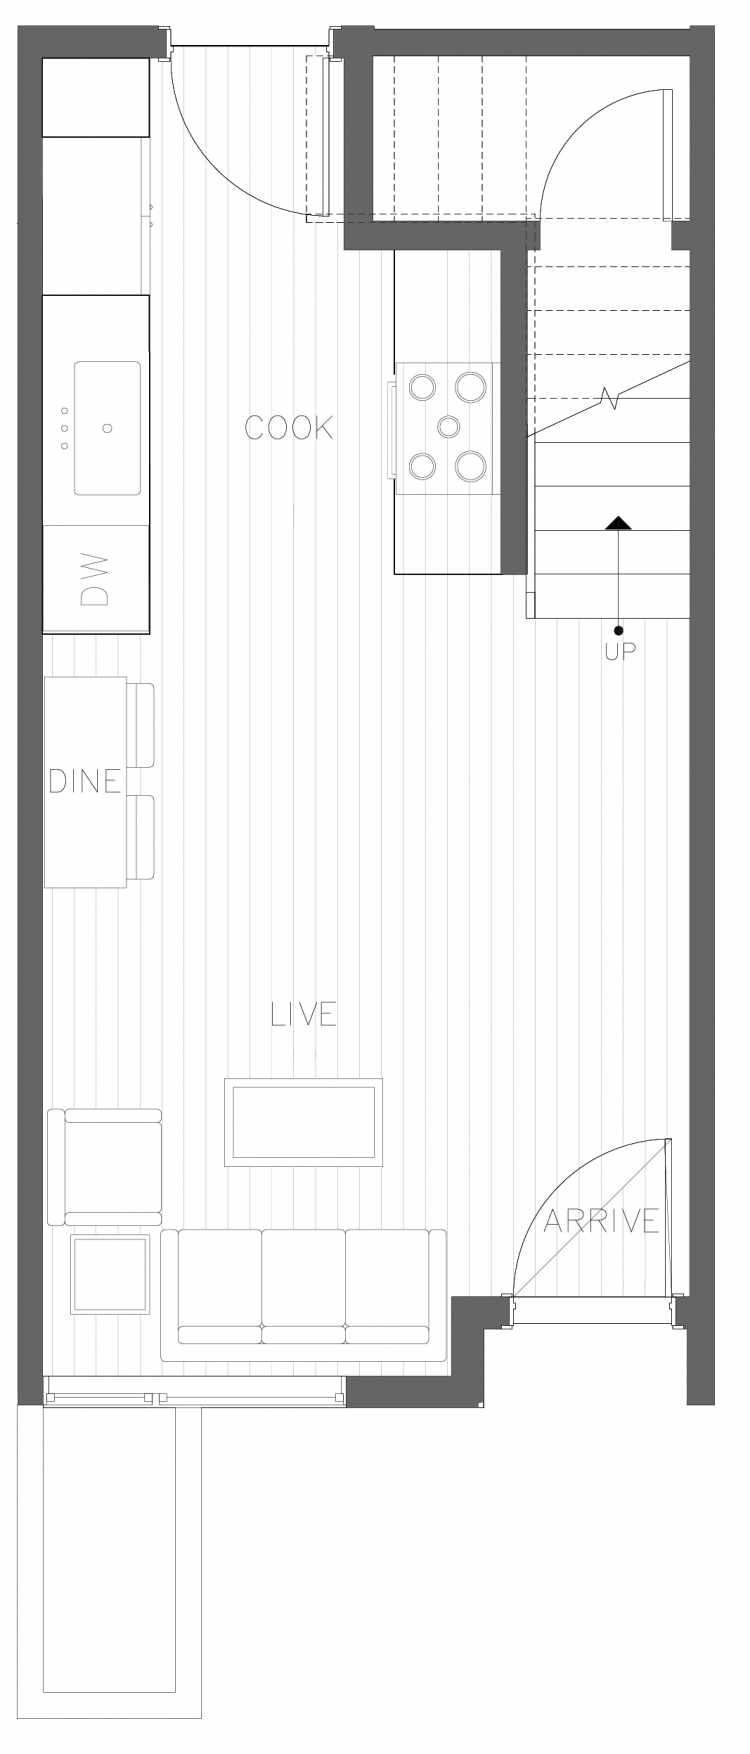 First Floor Plan of 1730B 11th Ave, One of the Altair Townhomes in Capitol Hill by Isola Homes